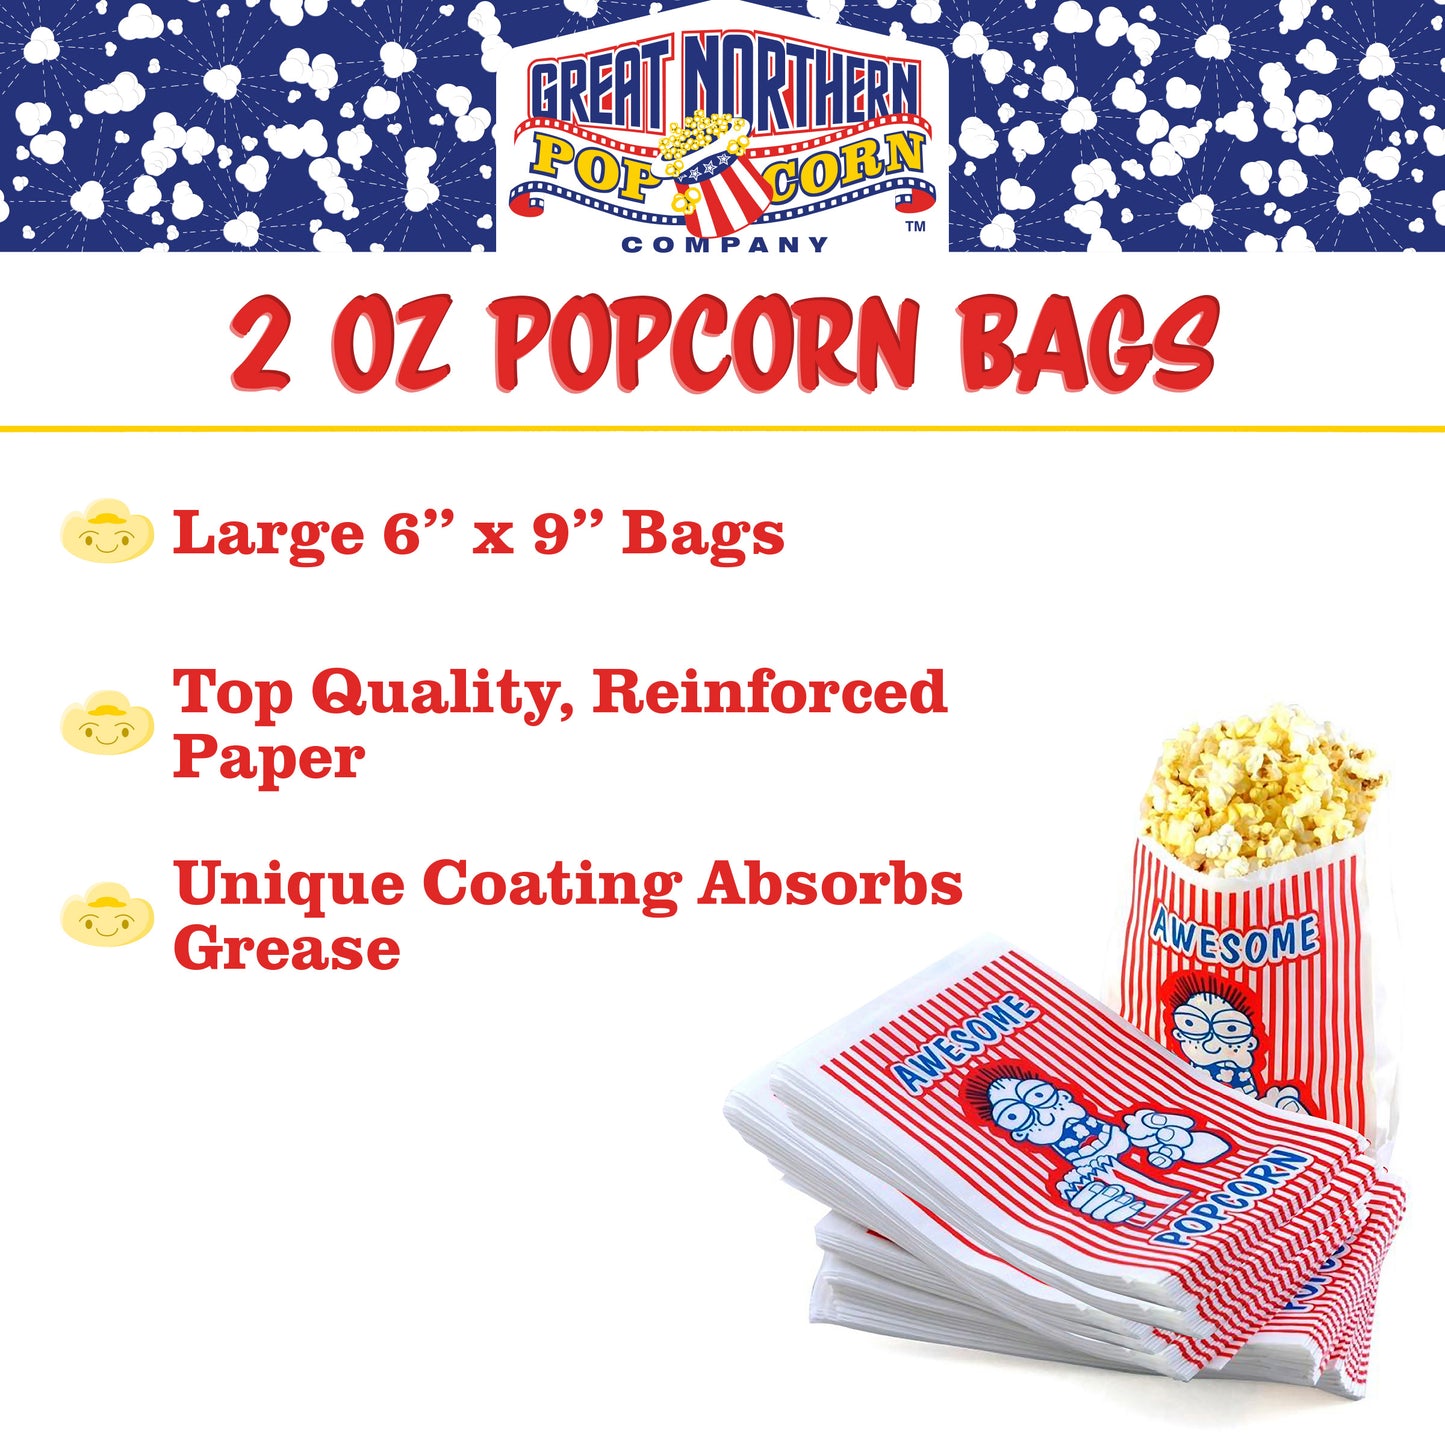 100 Popcorn Bags and 6 Ounce All-in-One Popcorn Packs  – Case of 24